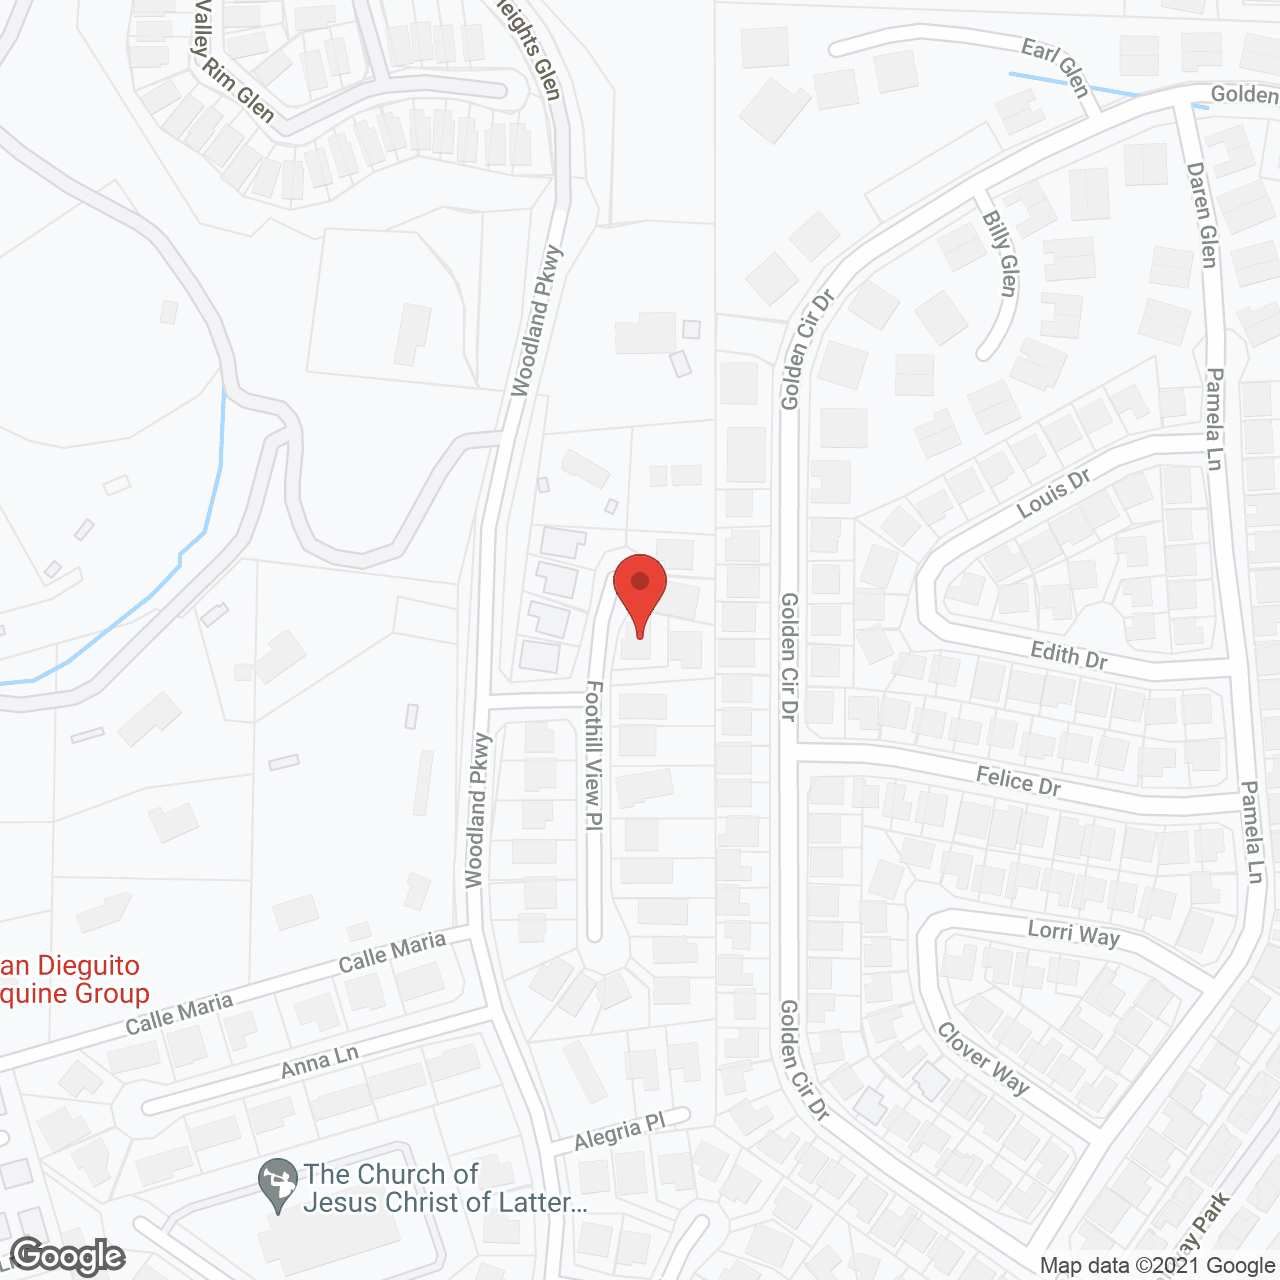 Juehm Residential Care Facility in google map